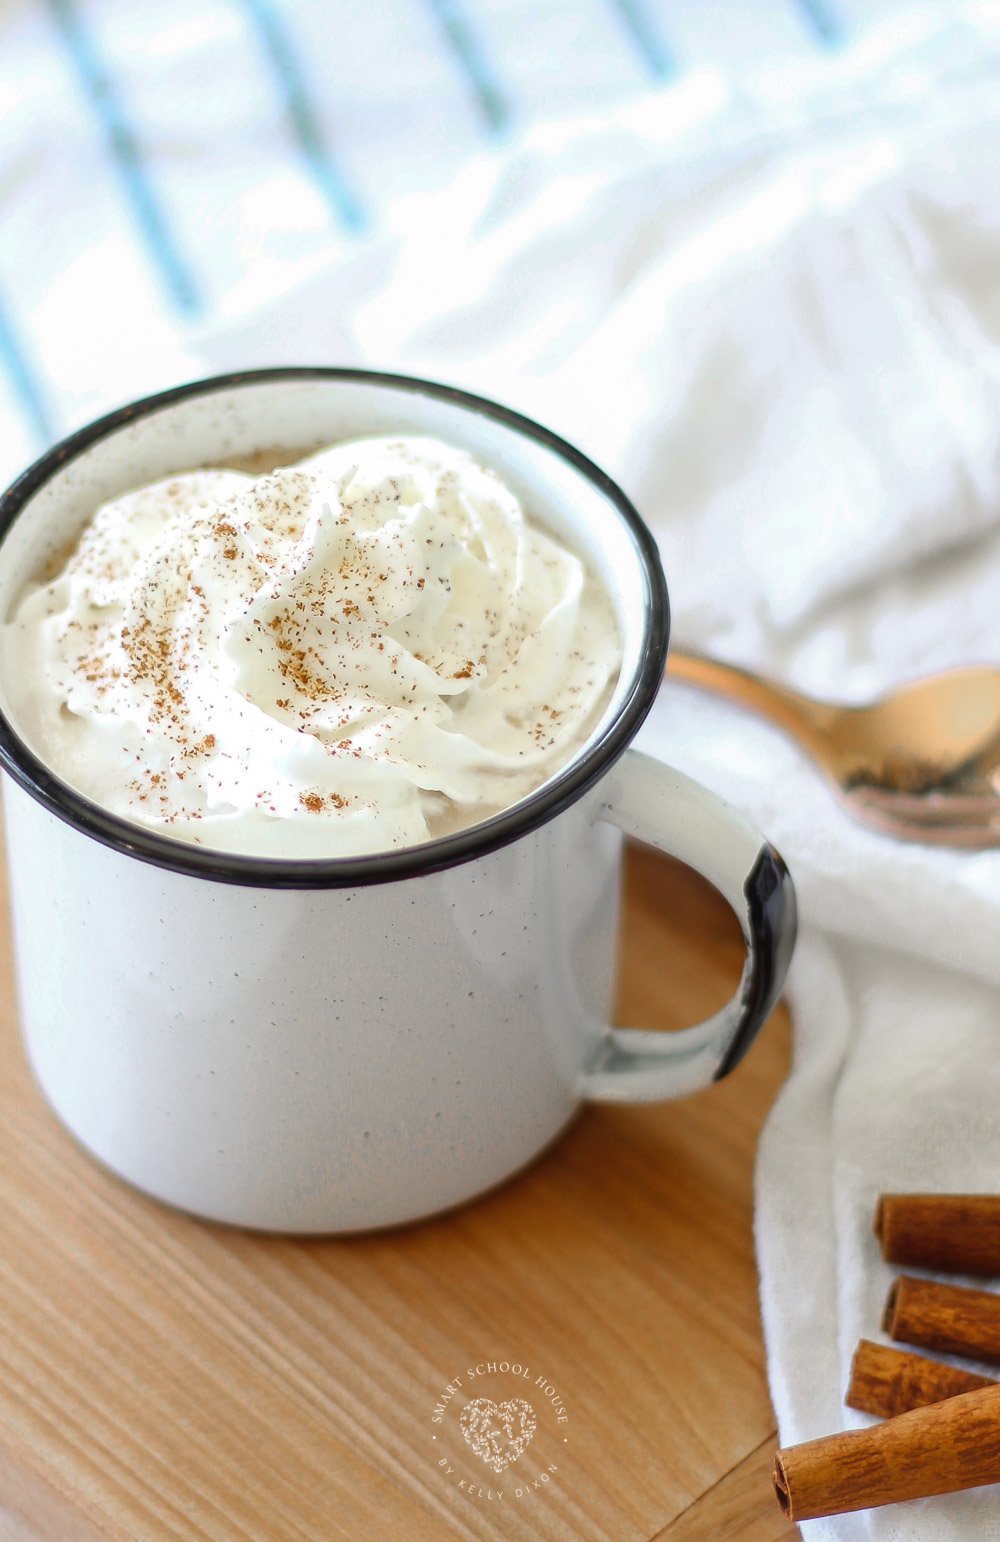 Homemade crock pot pumpkin latte. This recipe is EASY to make and is my go-to drink when entertaining in the fall or winter. Made with REAL ingredients. Everyone loves it. Copycat Starbucks pumpkin spice latte recipe in a crock pot. #pumpkinspice #crockpot #slowcooker